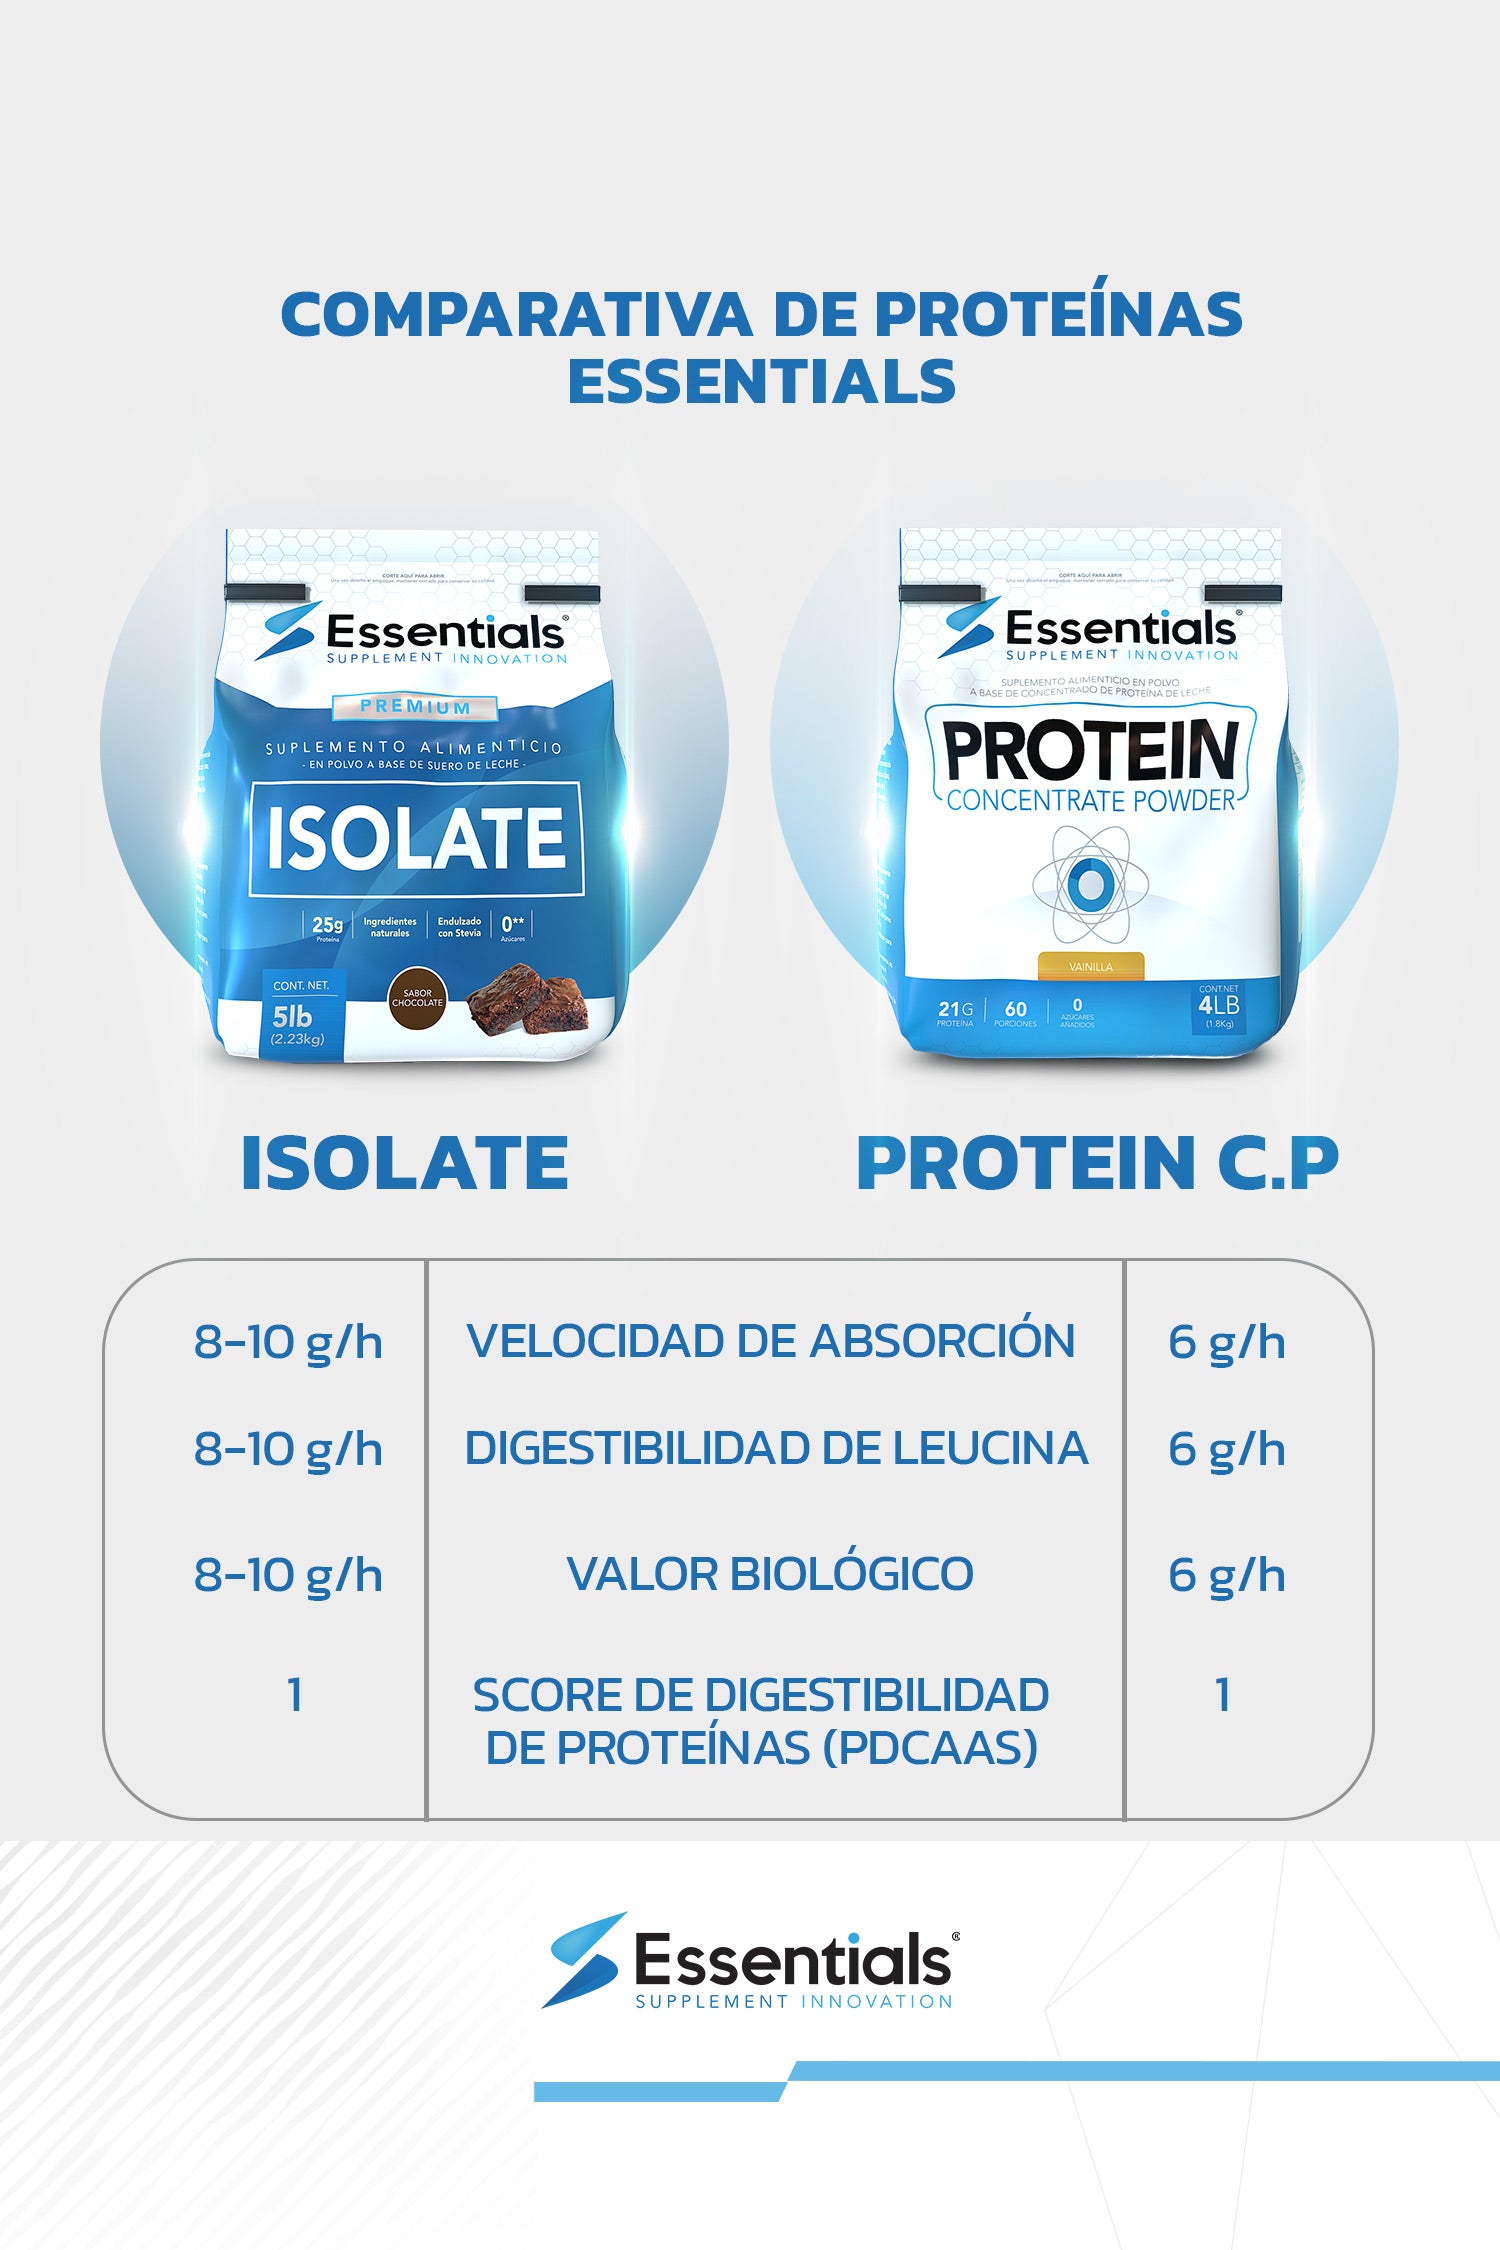 Protein Whey Concentrate Powder 4Lb